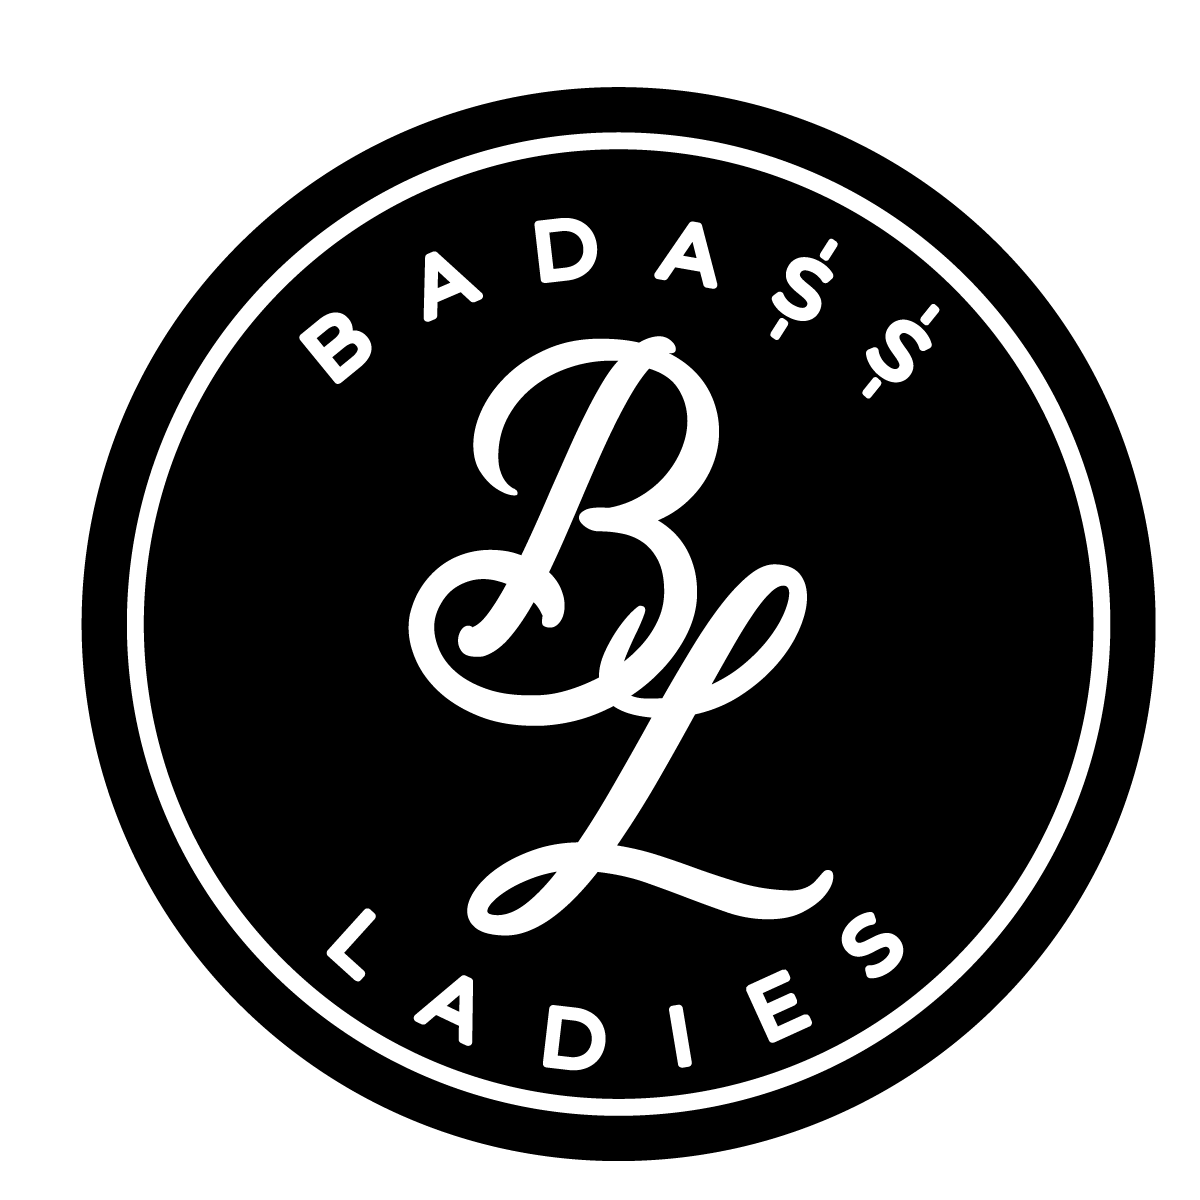 Bada$$ Ladies - We Want YOU to Join Us!